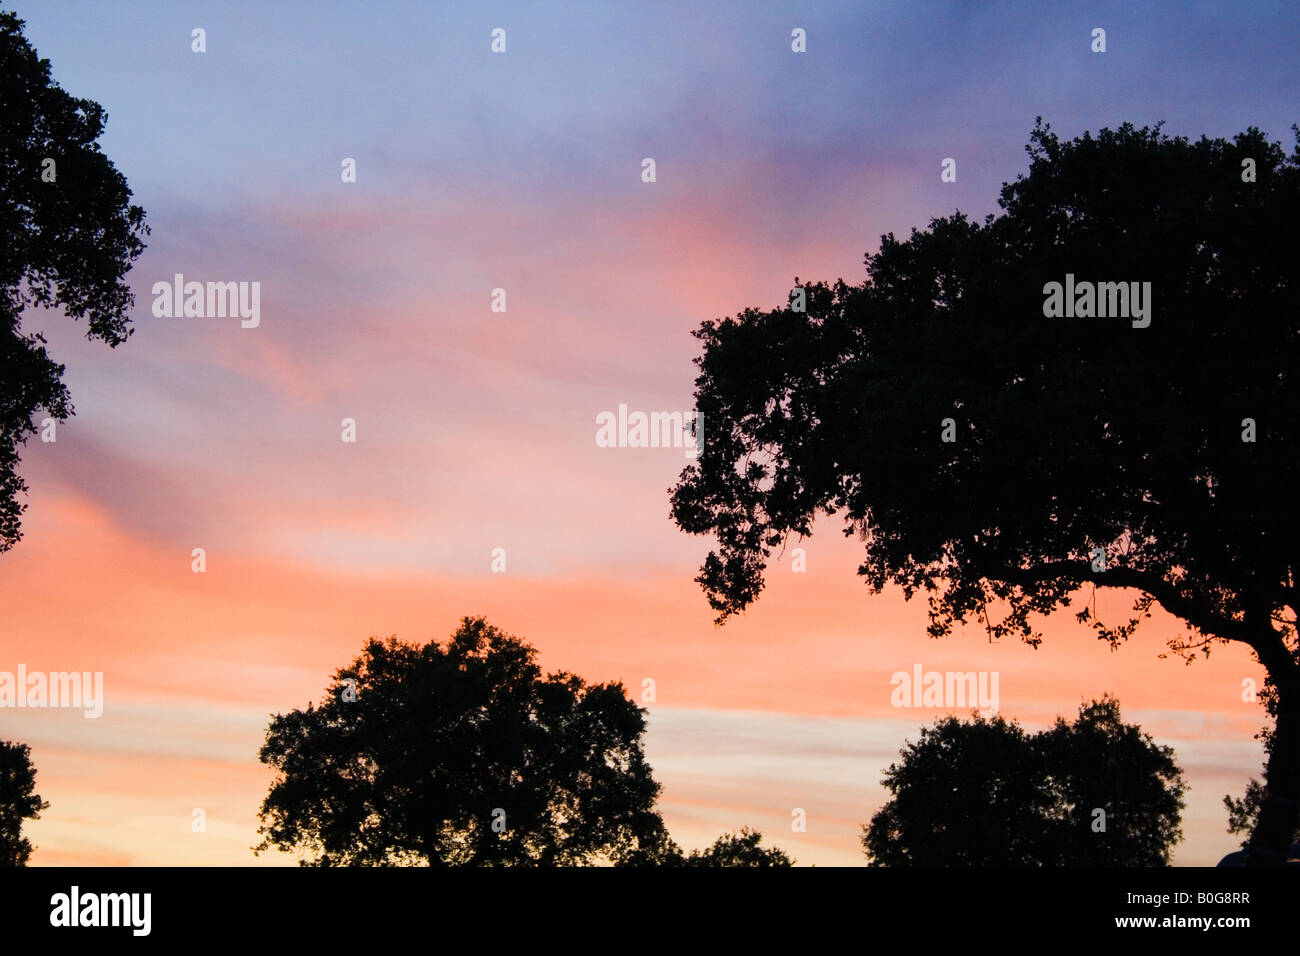 Andujar Jaen Province Spain Trees silhouetted against evening sky Stock Photo